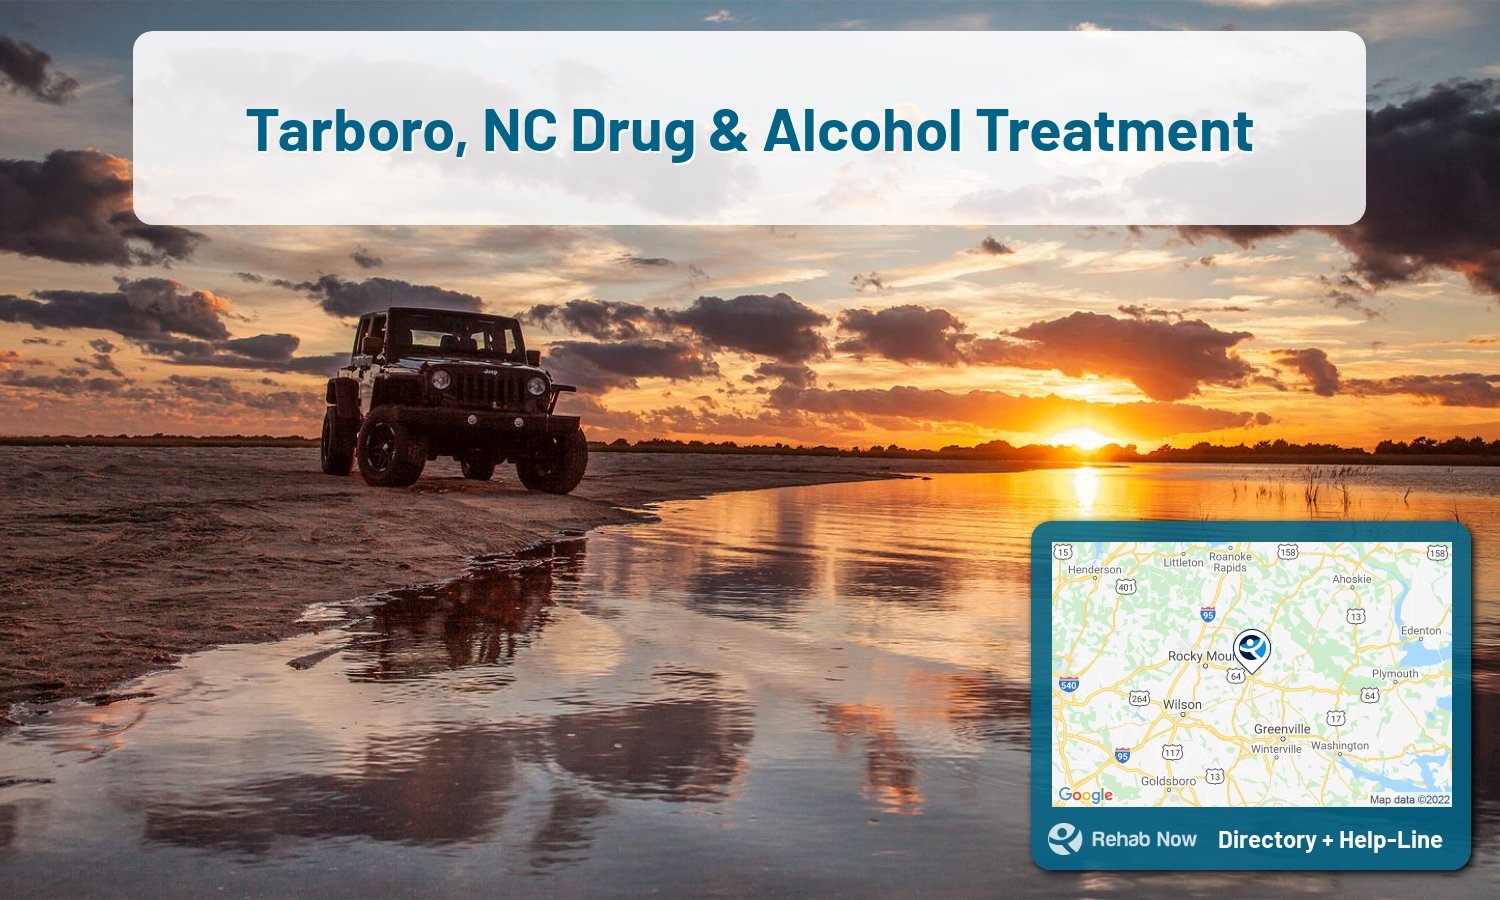 Let our expert counselors help find the best addiction treatment in Tarboro, North Carolina now with a free call to our hotline.